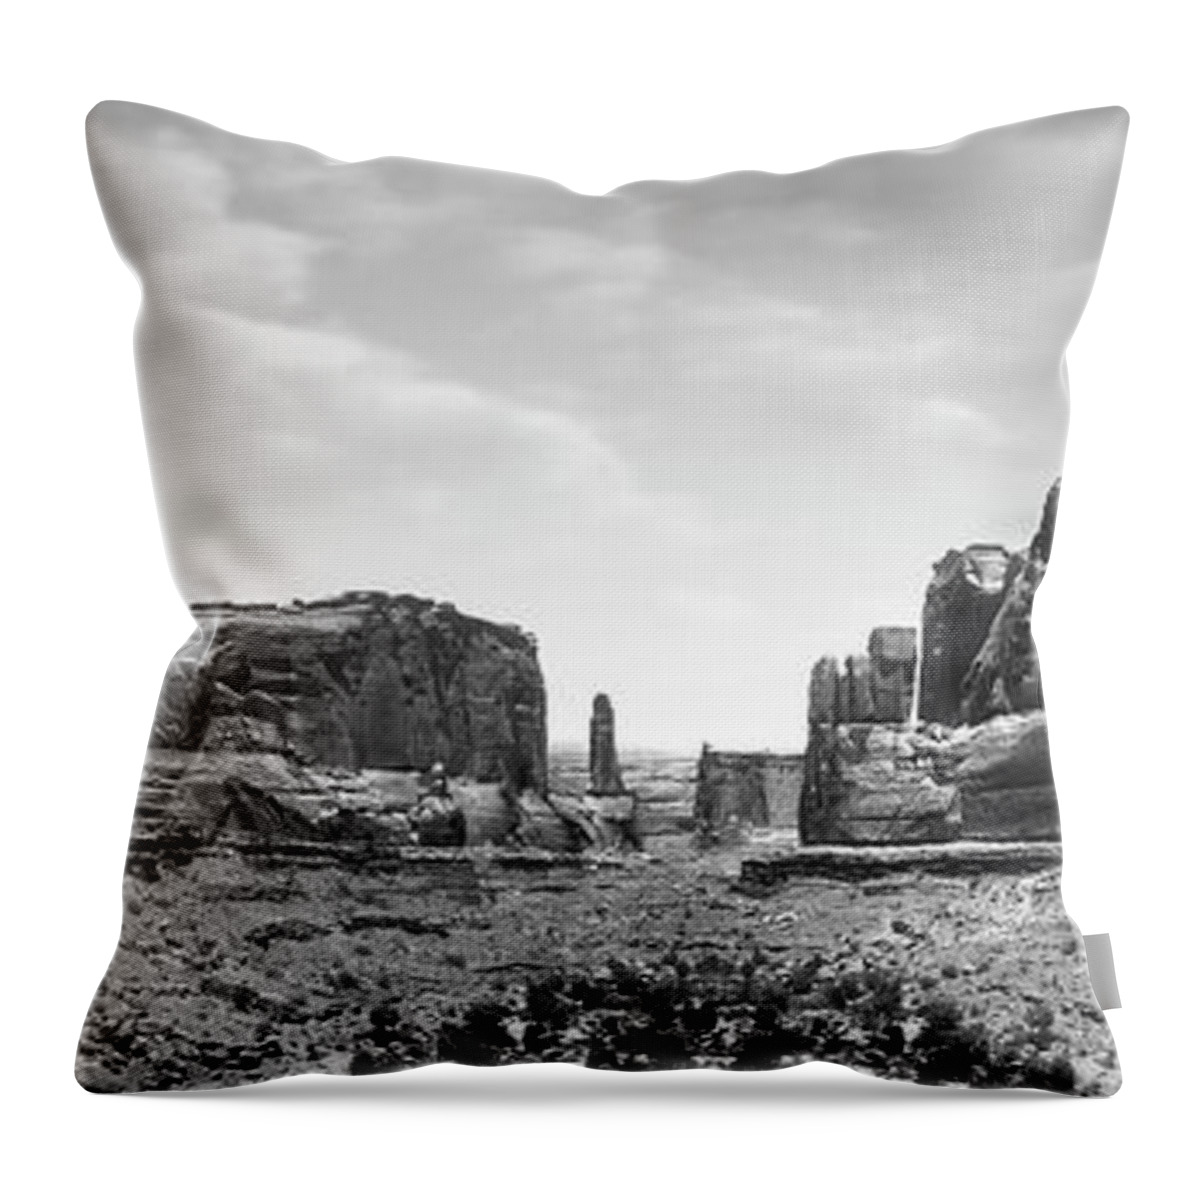 Utah Throw Pillow featuring the photograph Utah Outback by Mike McGlothlen